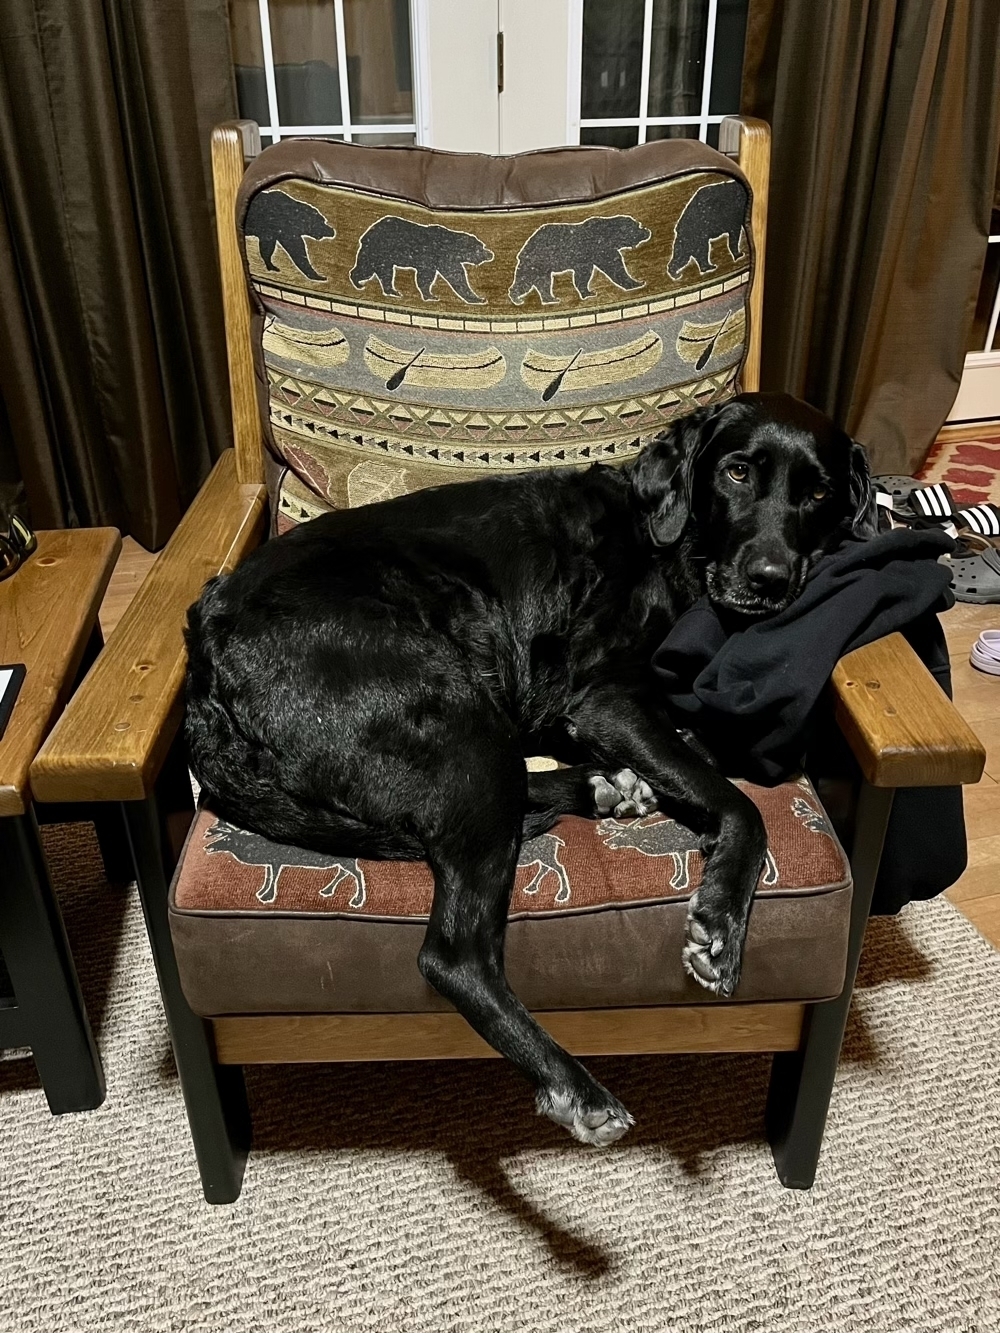 Black lab lounging on a chair that they barely fit into